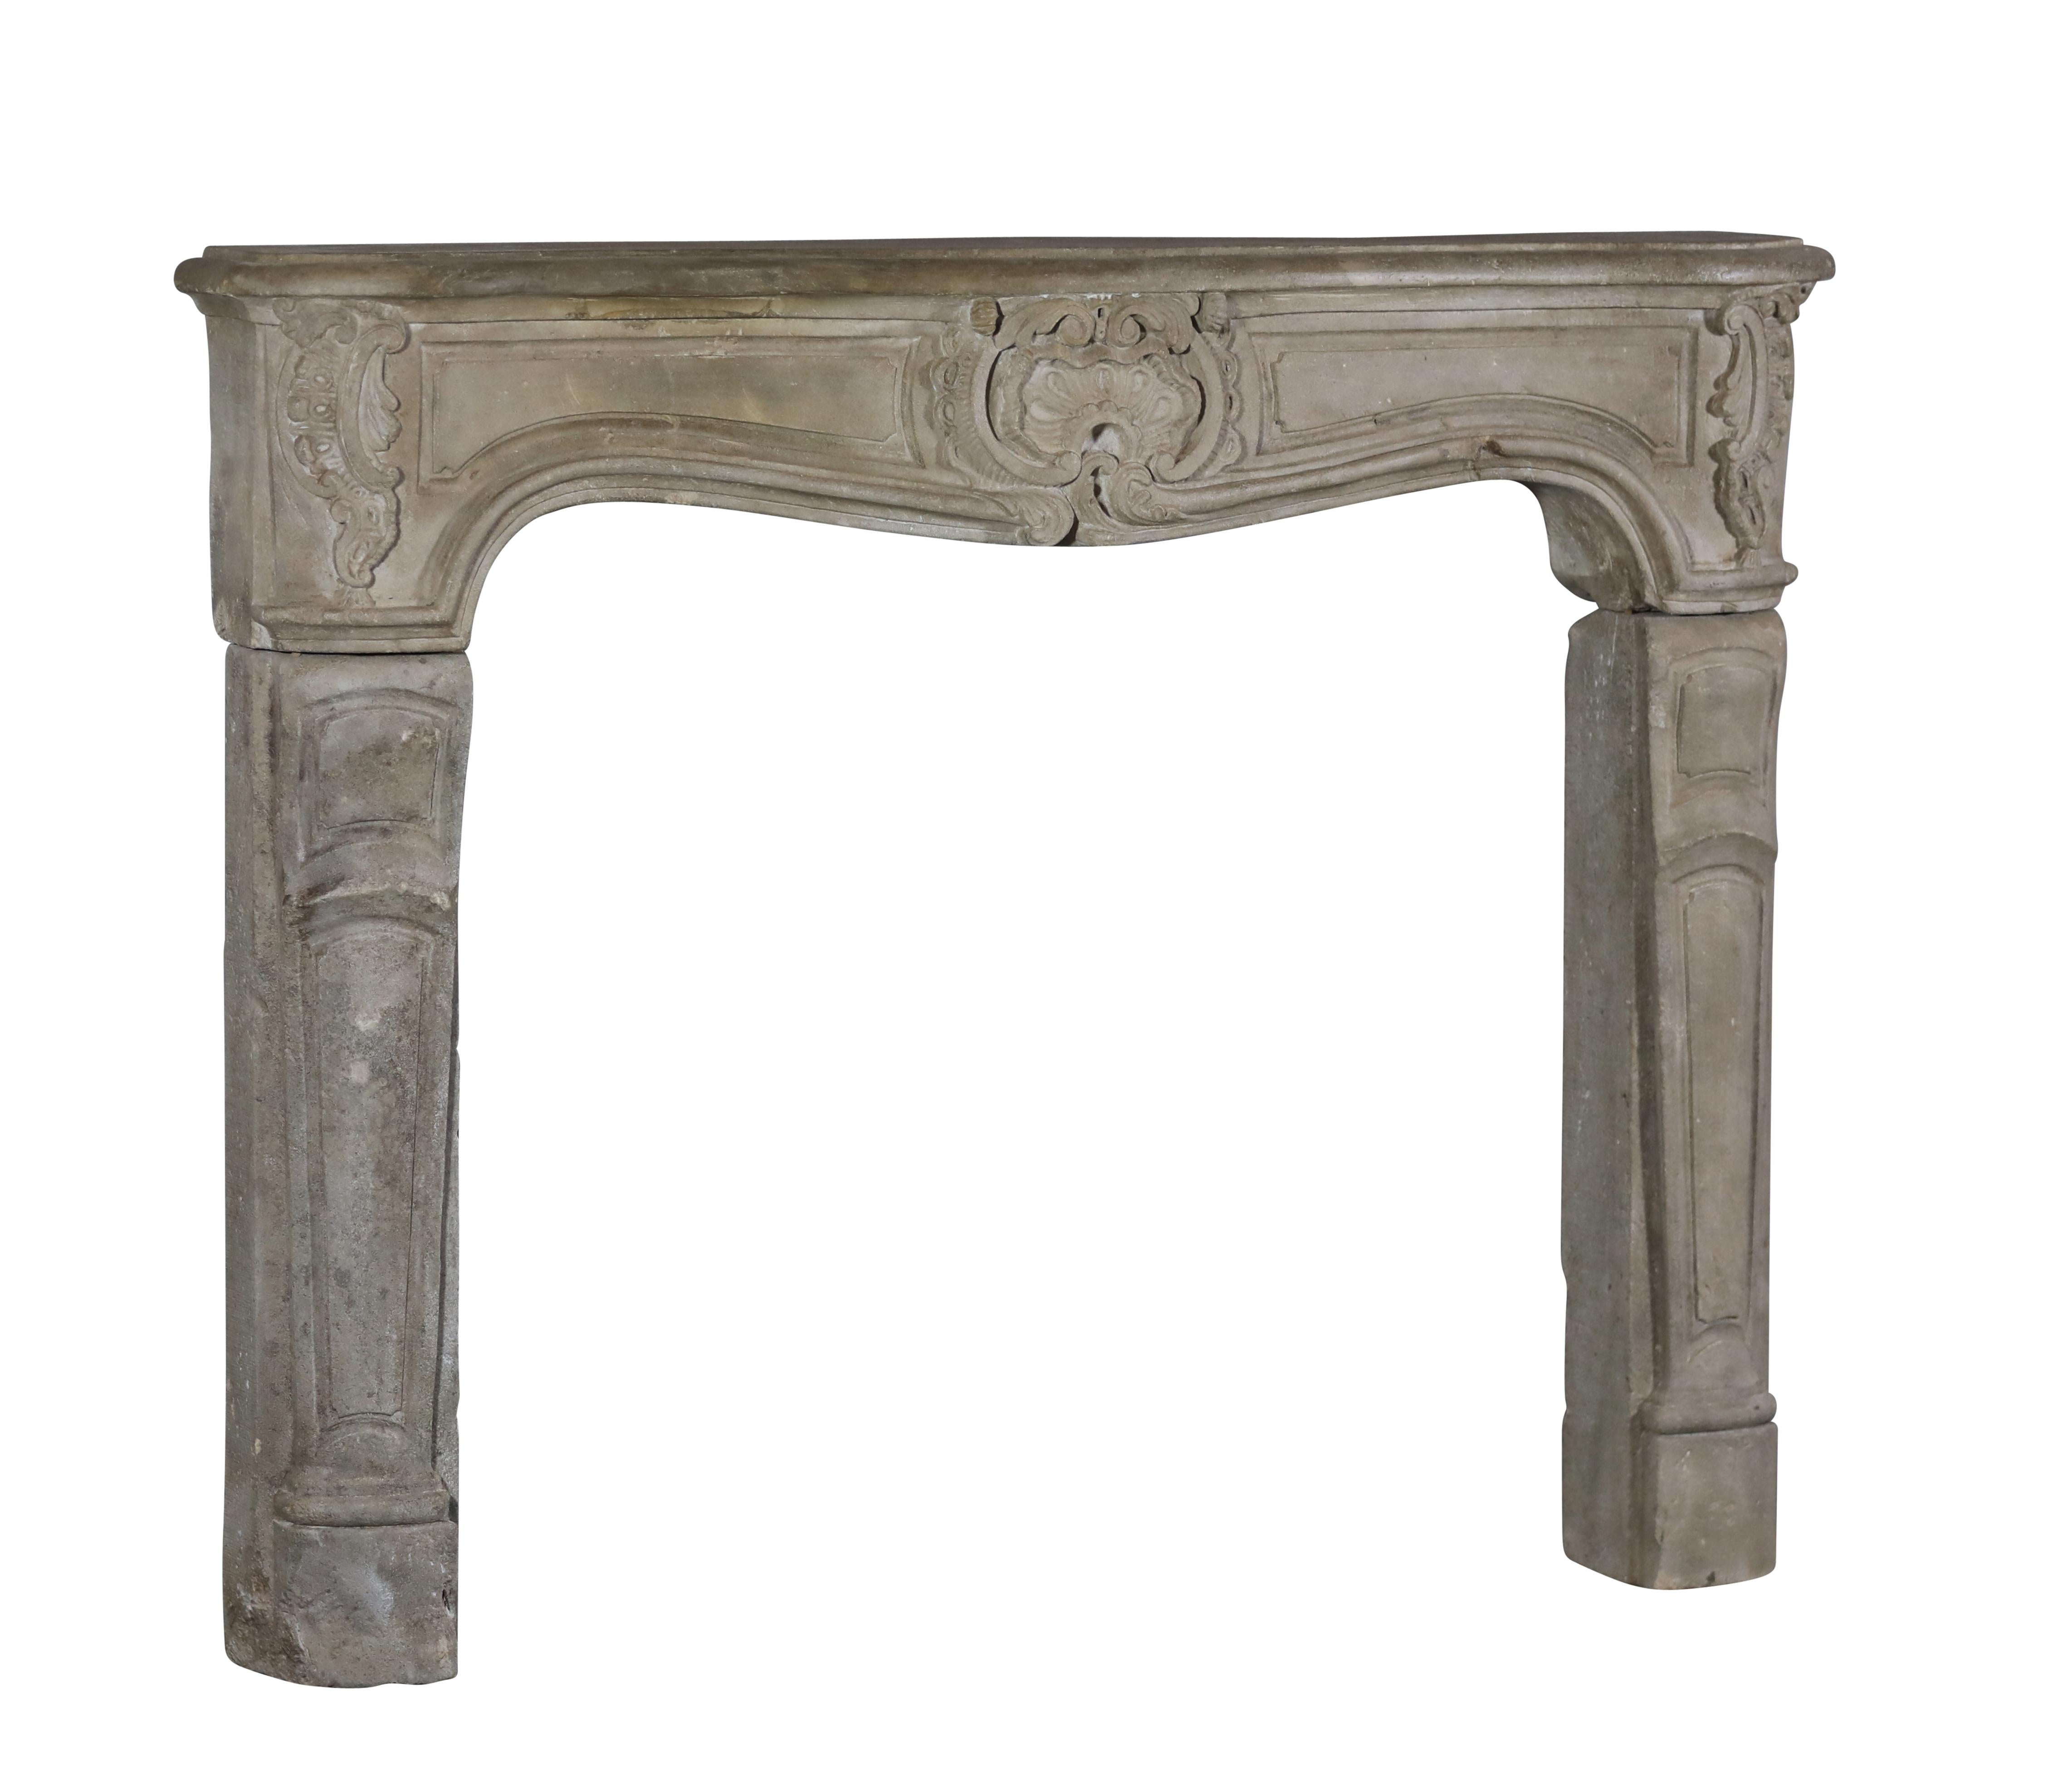 A French country, rustic, original antique fireplace surround in grez limestone. It is restored on the front of the shelf. This chimney piece is of the Regency period, 18th century. A perfect petite fireplace mantle with a lot of